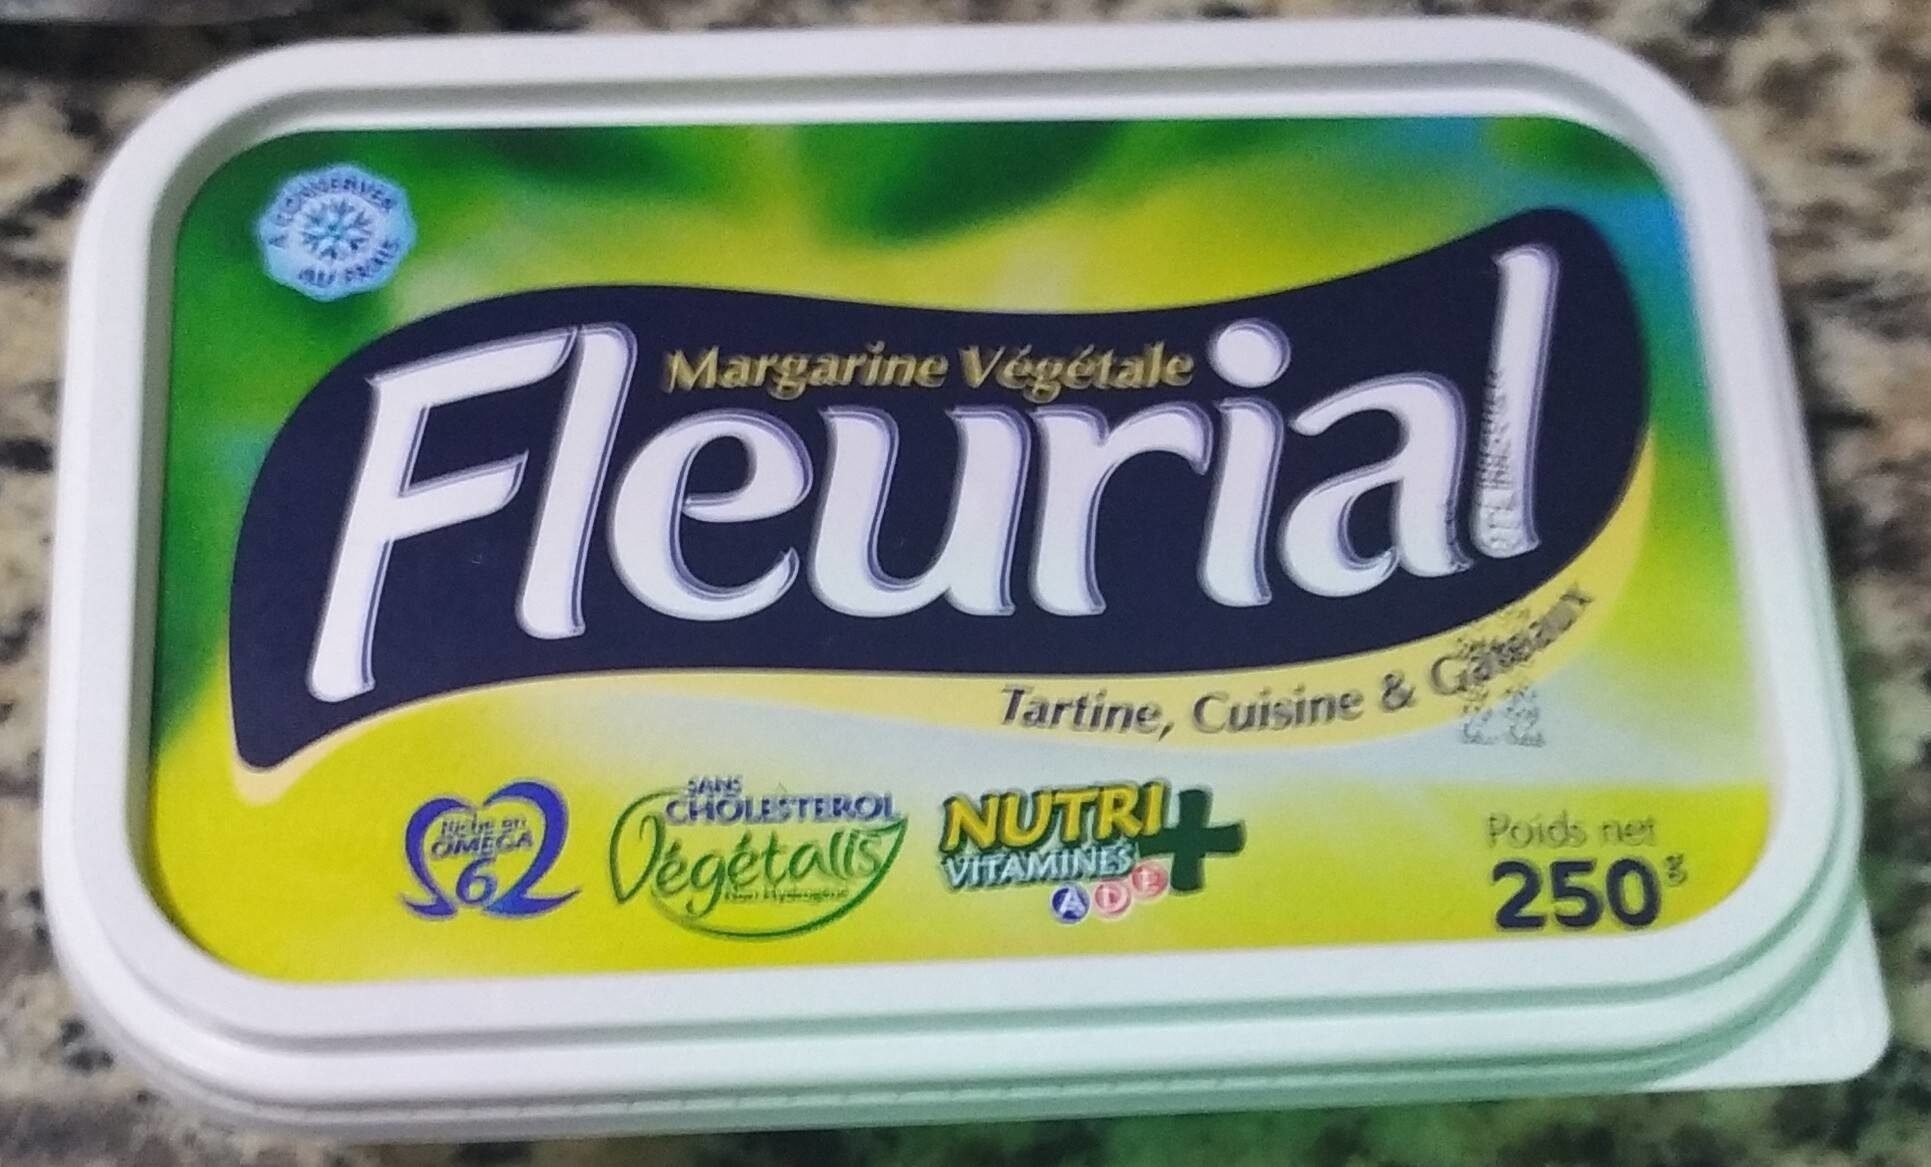 Fleurial - Product - fr